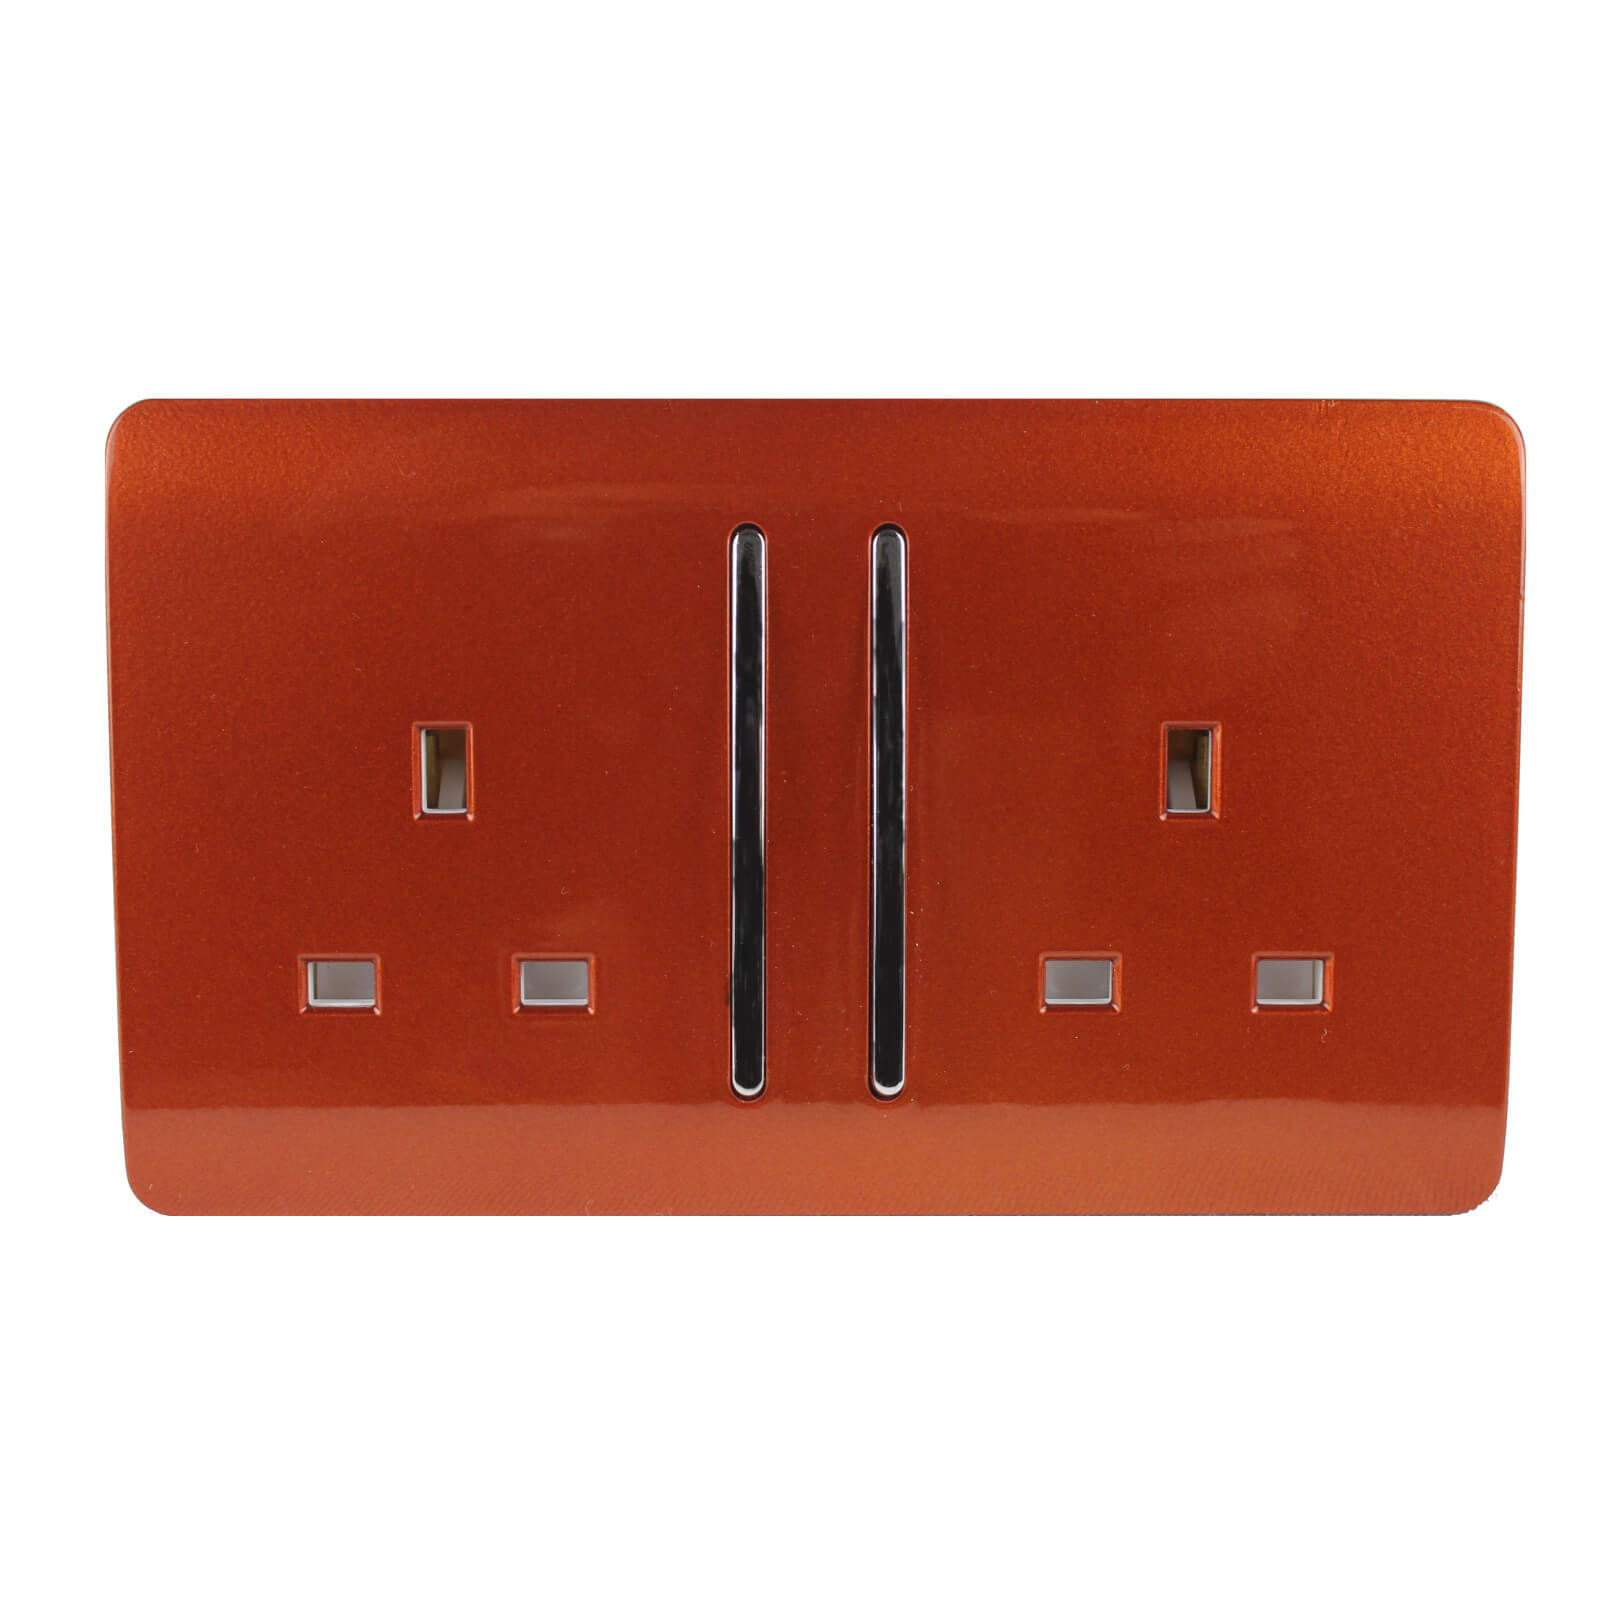 Trendi Switch 2 Gang 13A Long Switched Plug Socket in Screwless Copper